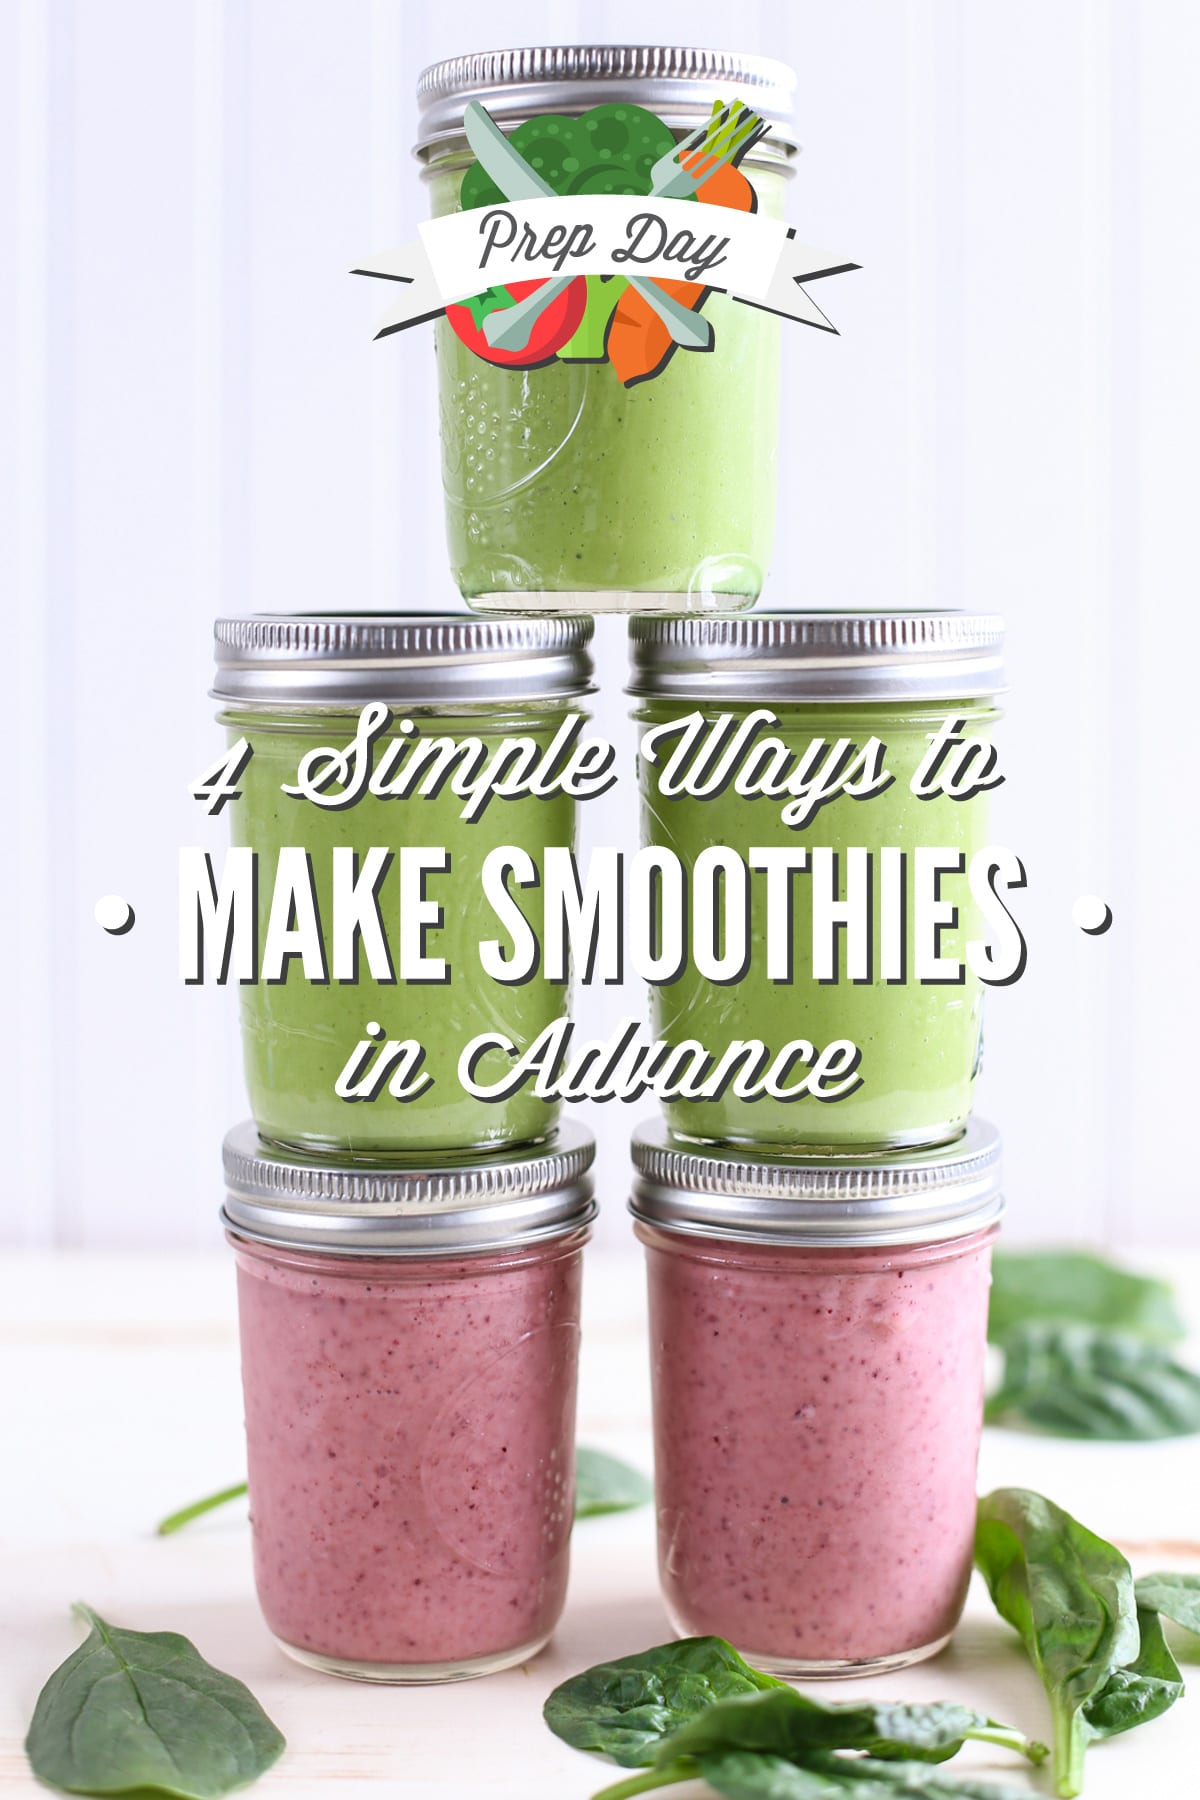 How to prep smoothies in advance